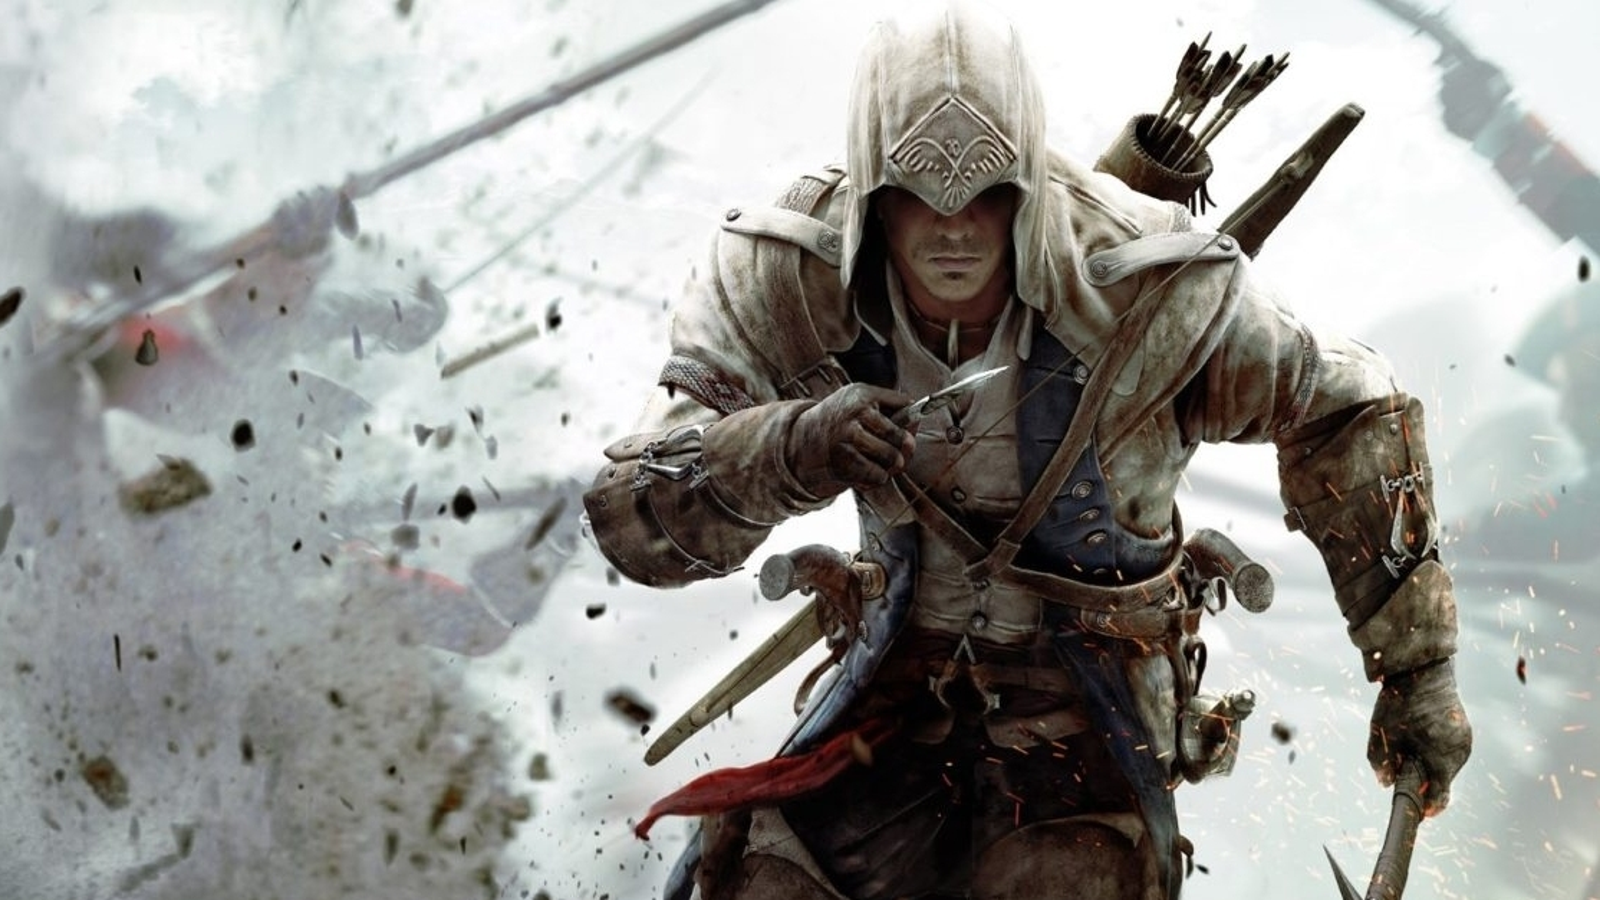 FPS 7-12 :: Assassin's Creed III Remastered General Discussions